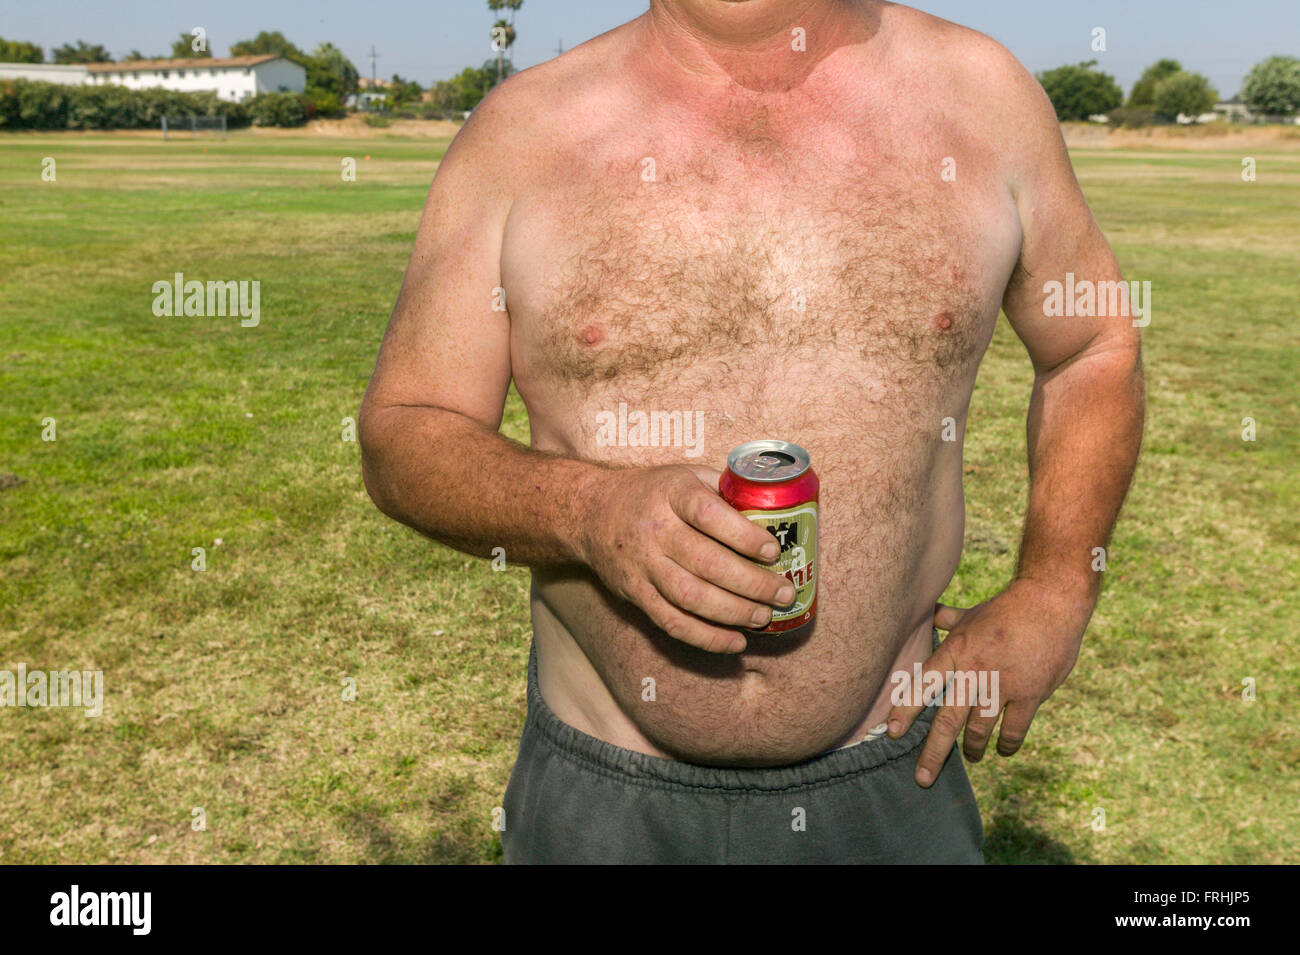 BUENA PARK, CA – JANUARY 30: Los Angeles cricket team British & Dominion play a game in Buena Park, California on July 09, 2005. Stock Photo